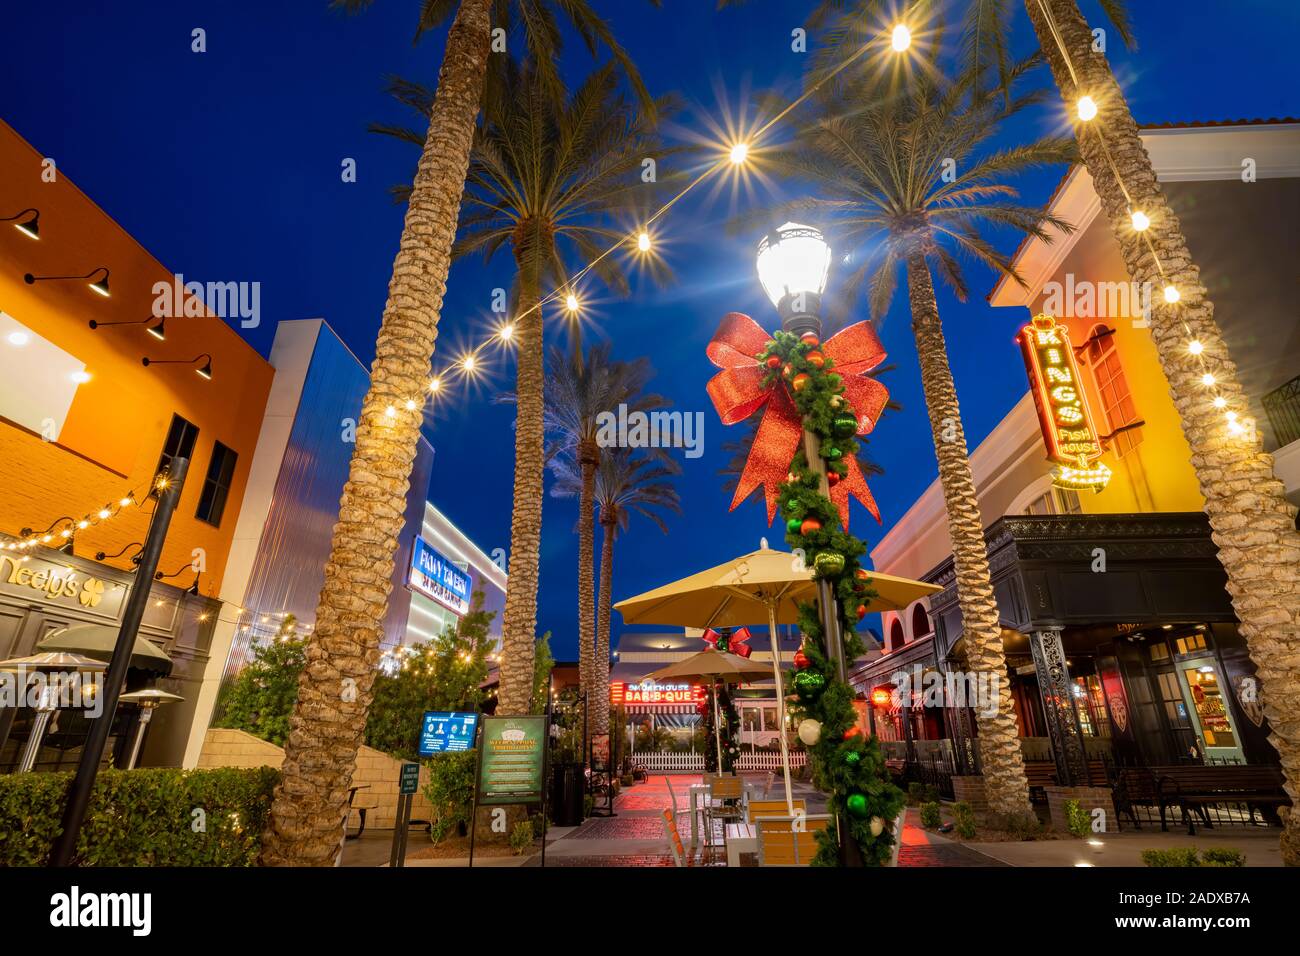 Las Vegas, DEC 2: Christmas lights, decoration of The District at Green Valley Ranch on DEC 2, 2019 at Las Vegas, Henderson Stock Photo